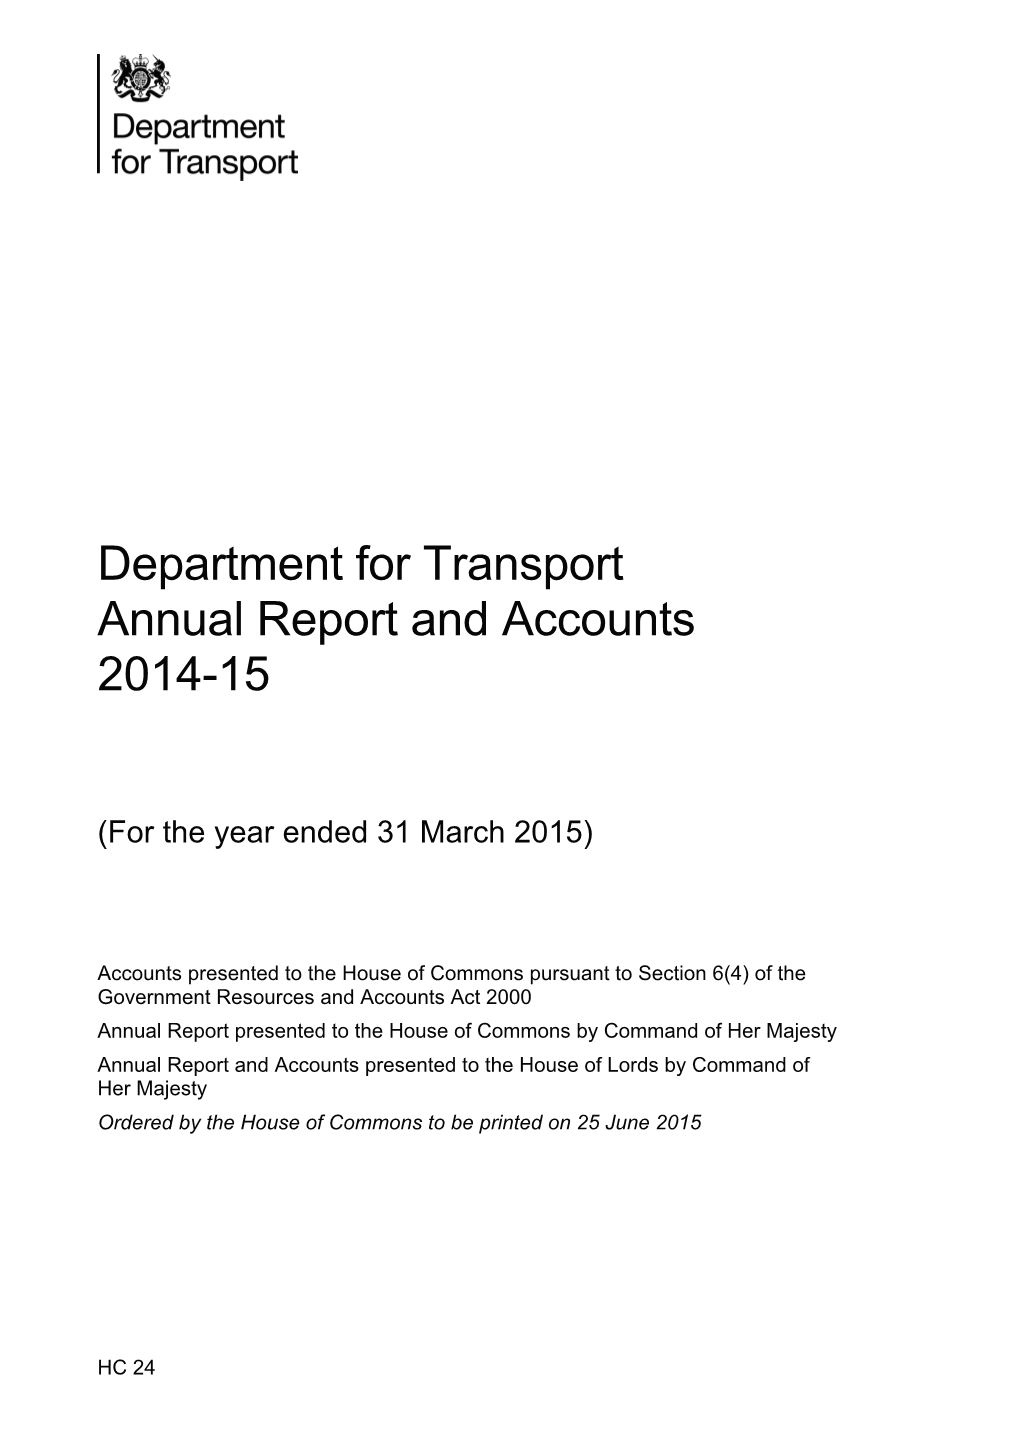 Department for Transport Annual Report and Accounts 2014-15